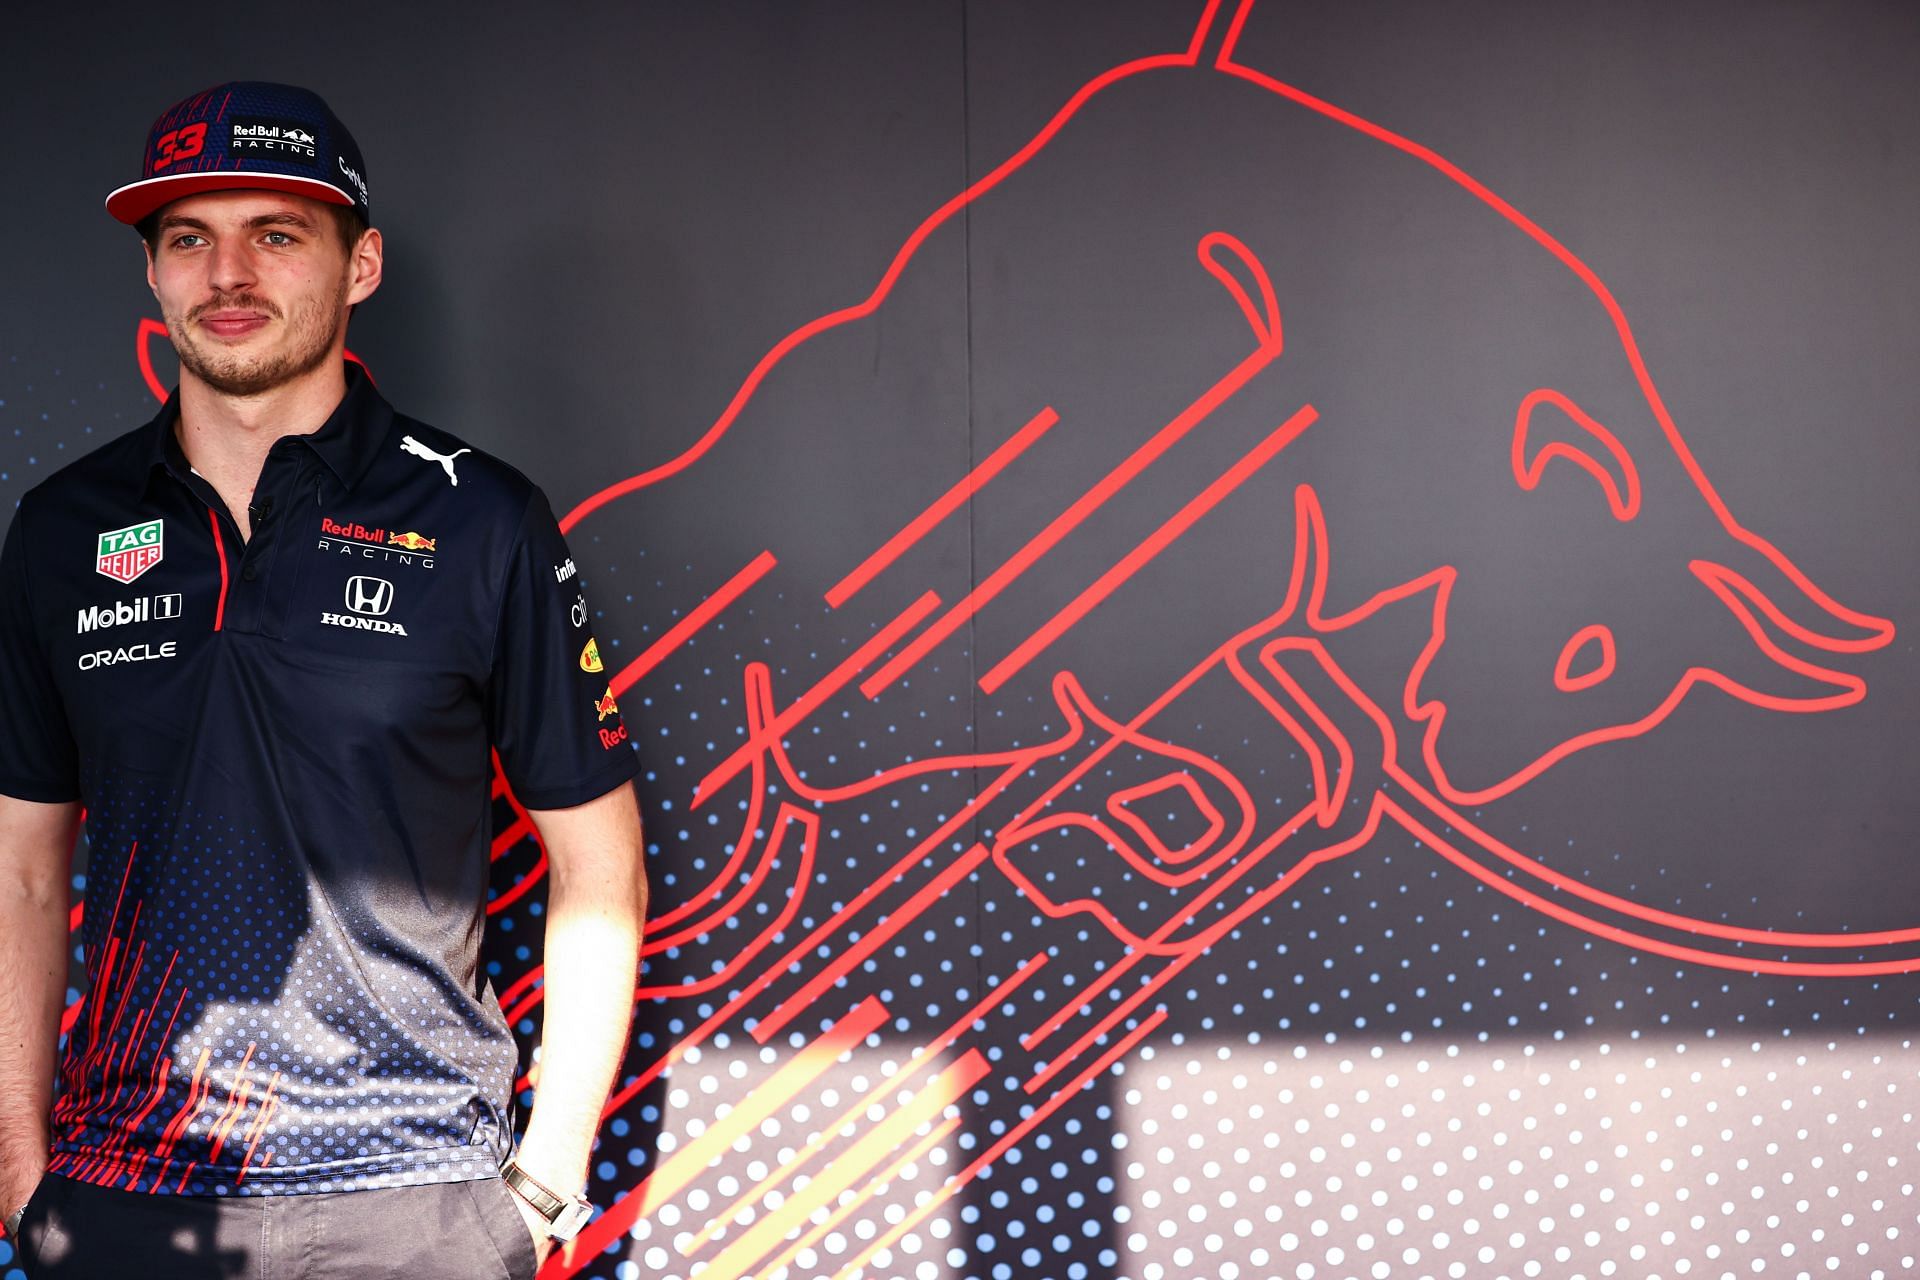 Max Verstappen looks on in the paddock ahead of the 2021 Qatar Grand Prix. (Photo by Mark Thompson/Getty Images)